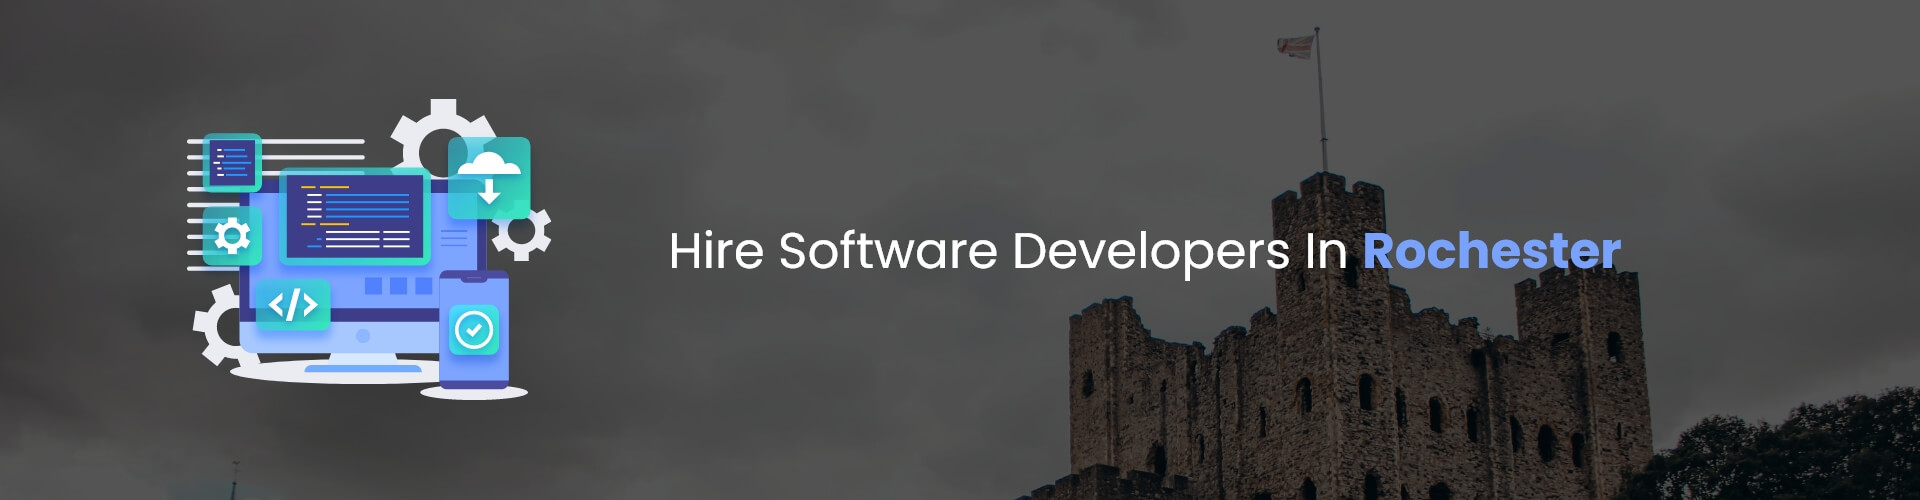 hire software developers in rochester